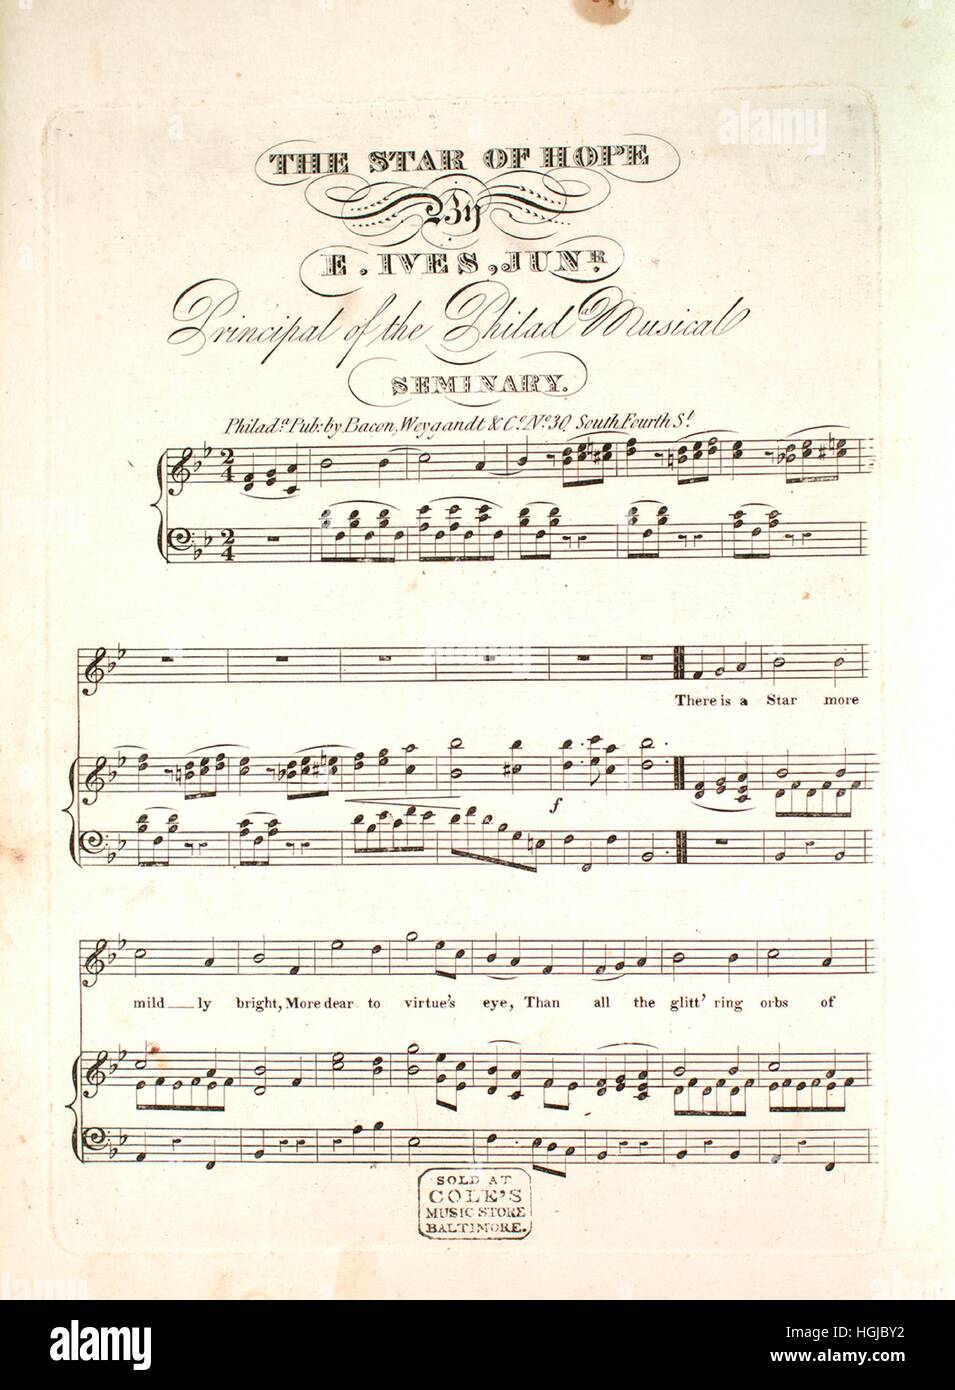 Sheet music cover image of the song 'The Star of Hope', with original authorship notes reading 'By E Ives, Junr, Principal of the Philad Musical Seminary', United States, 1900. The publisher is listed as 'Bacon, Weygandt and Co., No. 30 South Fourth St.', the form of composition is 'strophic', the instrumentation is 'piano and voice', the first line reads 'There is a star more mildly bright, more dear to virtue's eye', and the illustration artist is listed as 'None'. Stock Photo